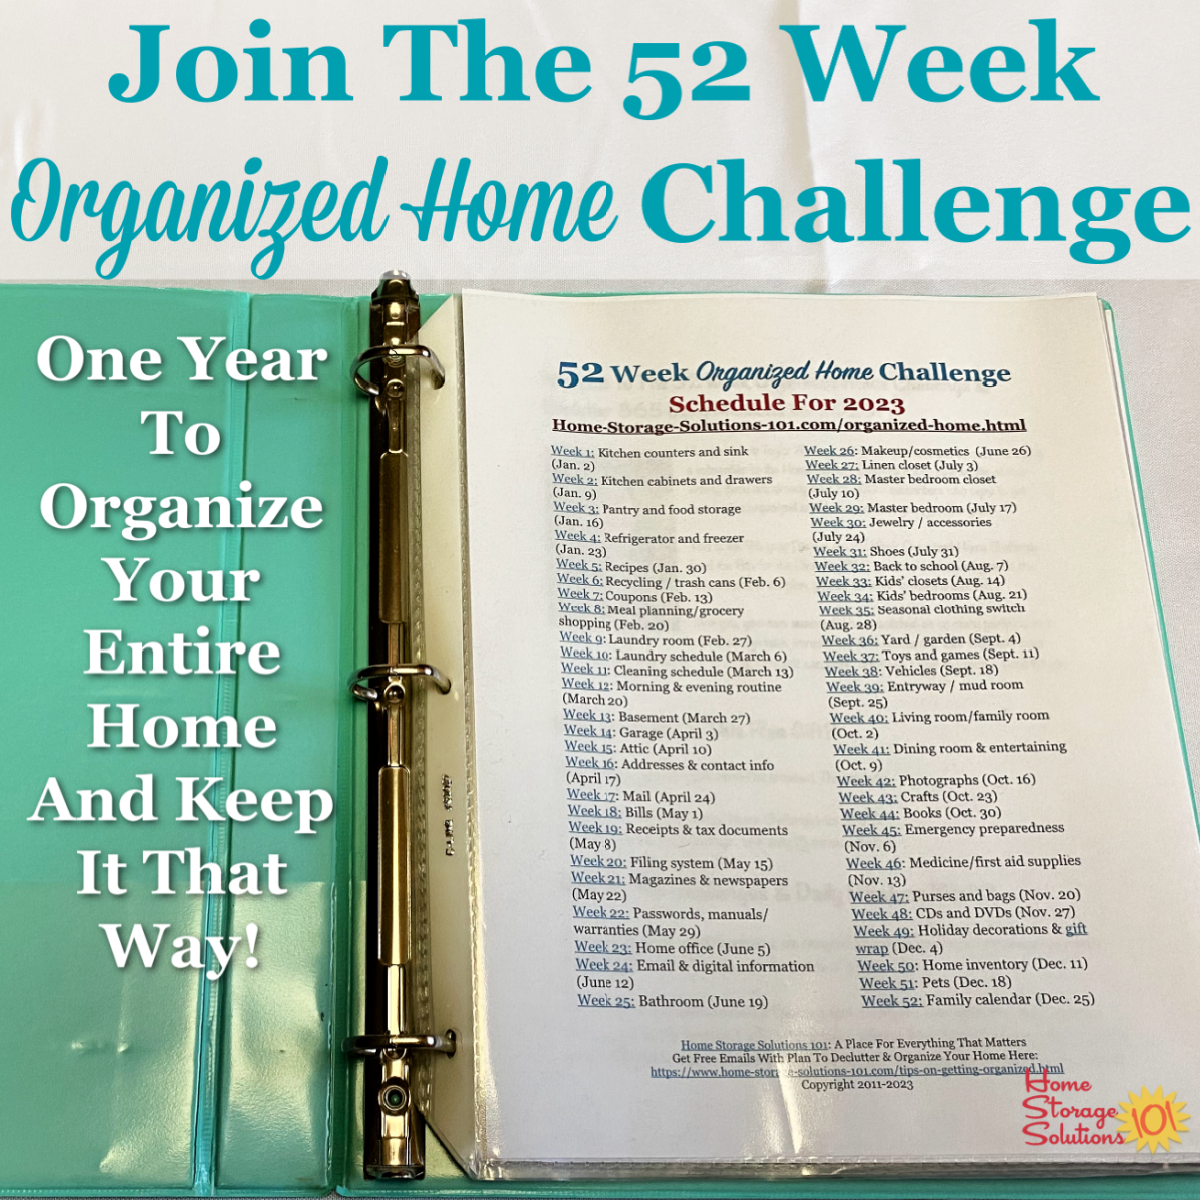 Join the 52 Week Organized Home Challenge